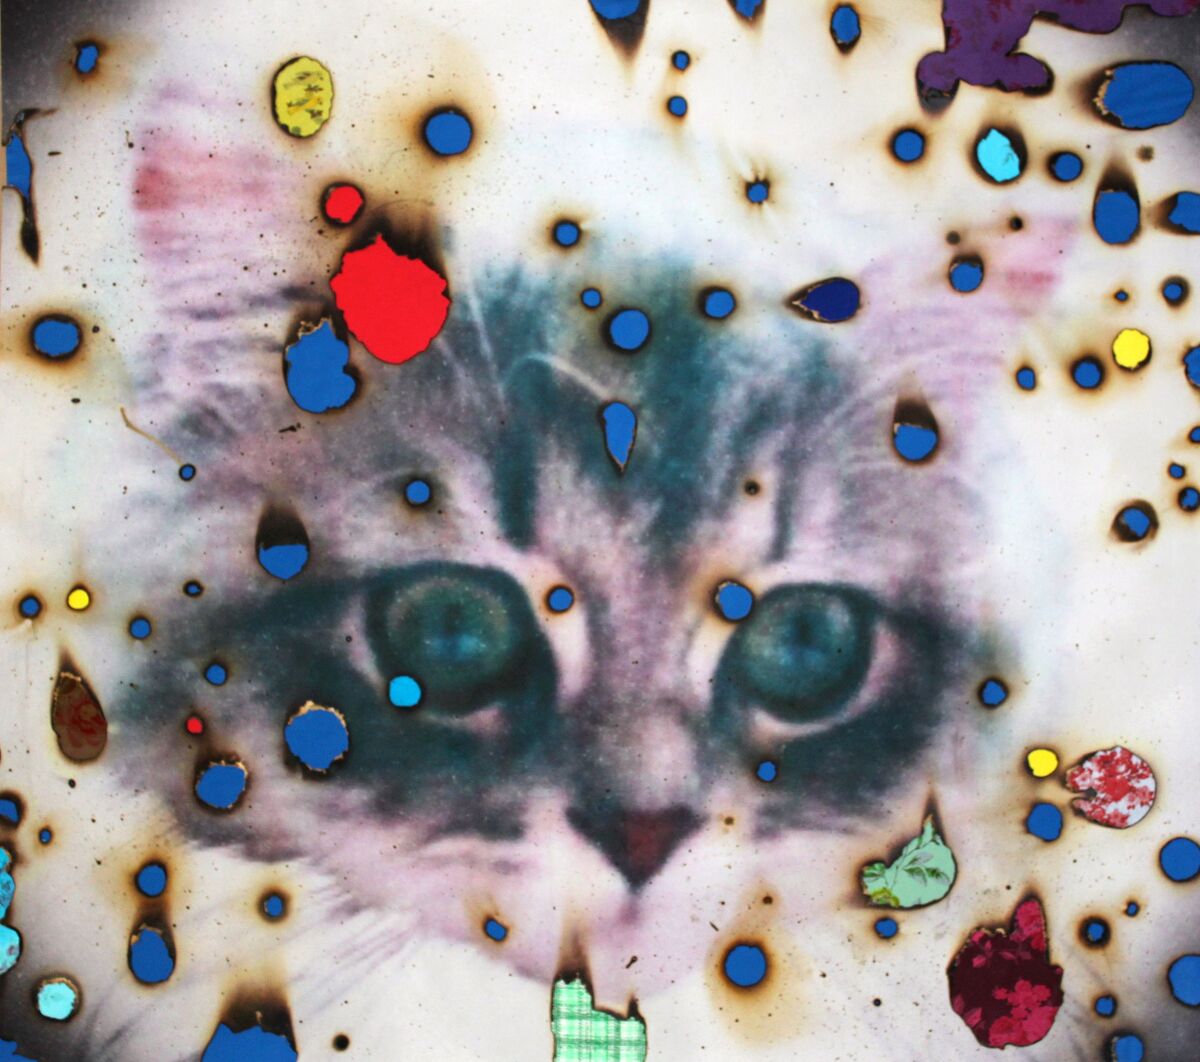 "I ♥ Kitties" by Miyoshi Barosh, 2014. Hand-embellished digital pigment print with fabric collage, 44 inches by 46 inches. 
